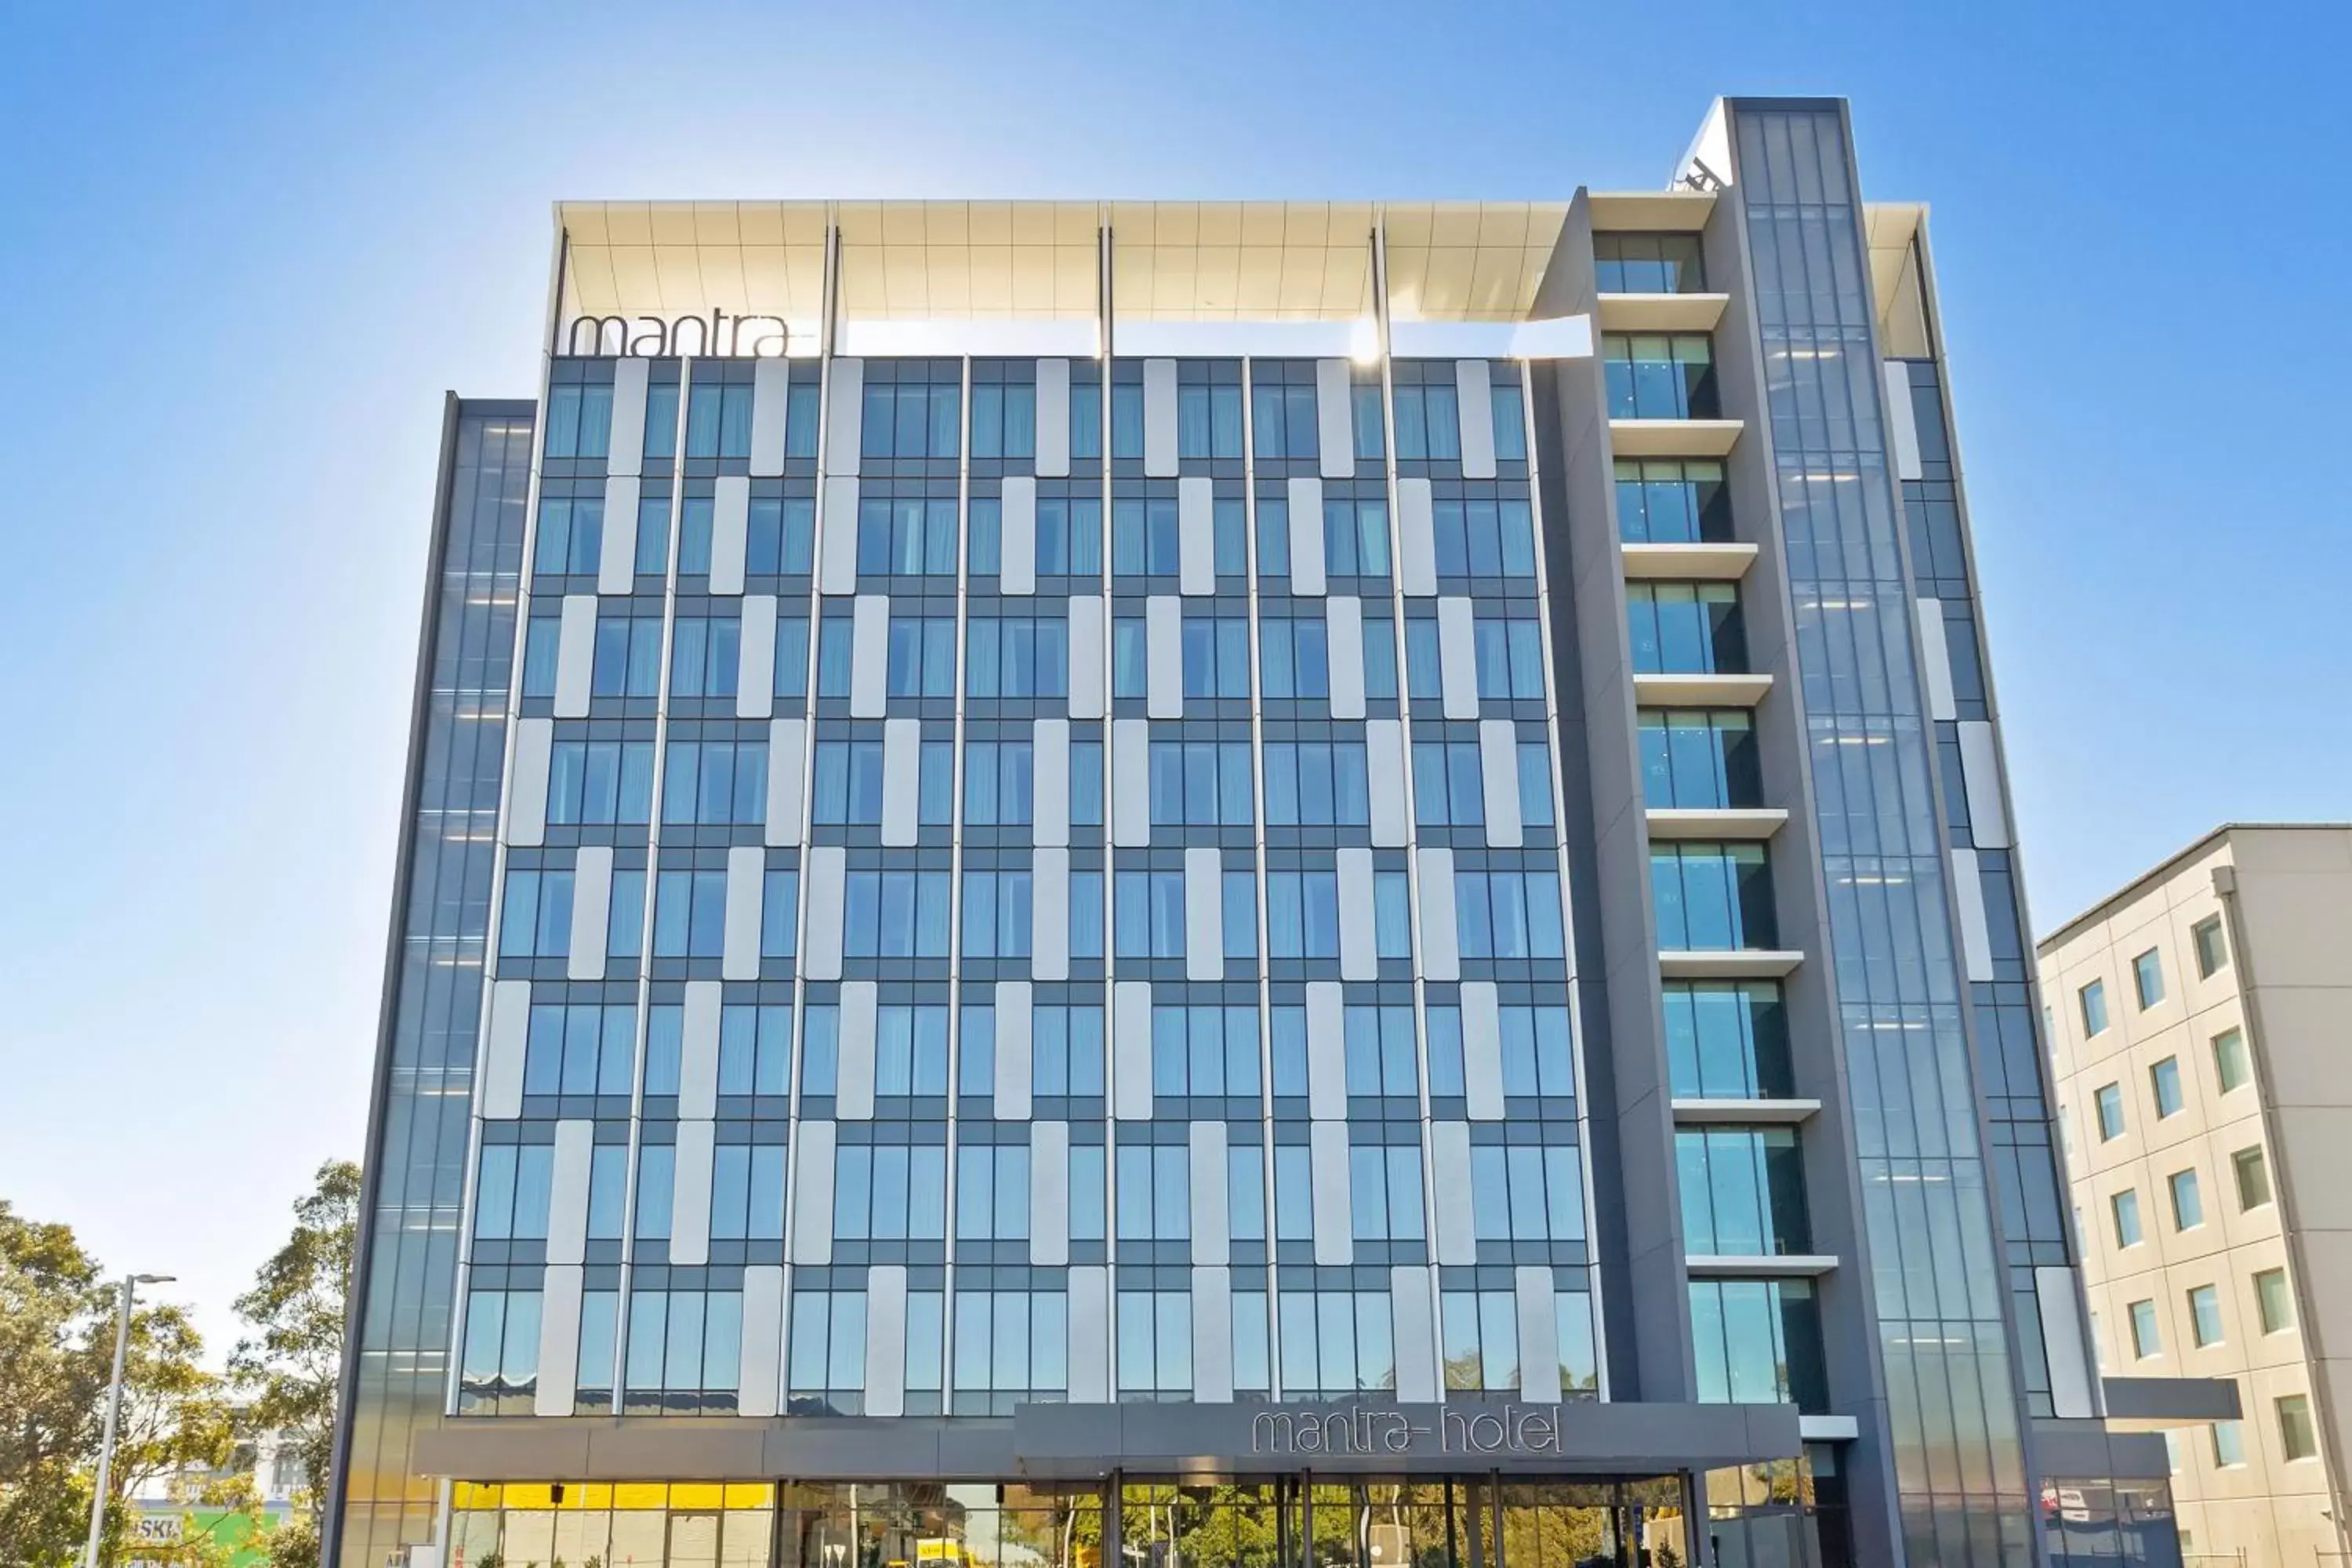 Property Building in Mantra Hotel at Sydney Airport